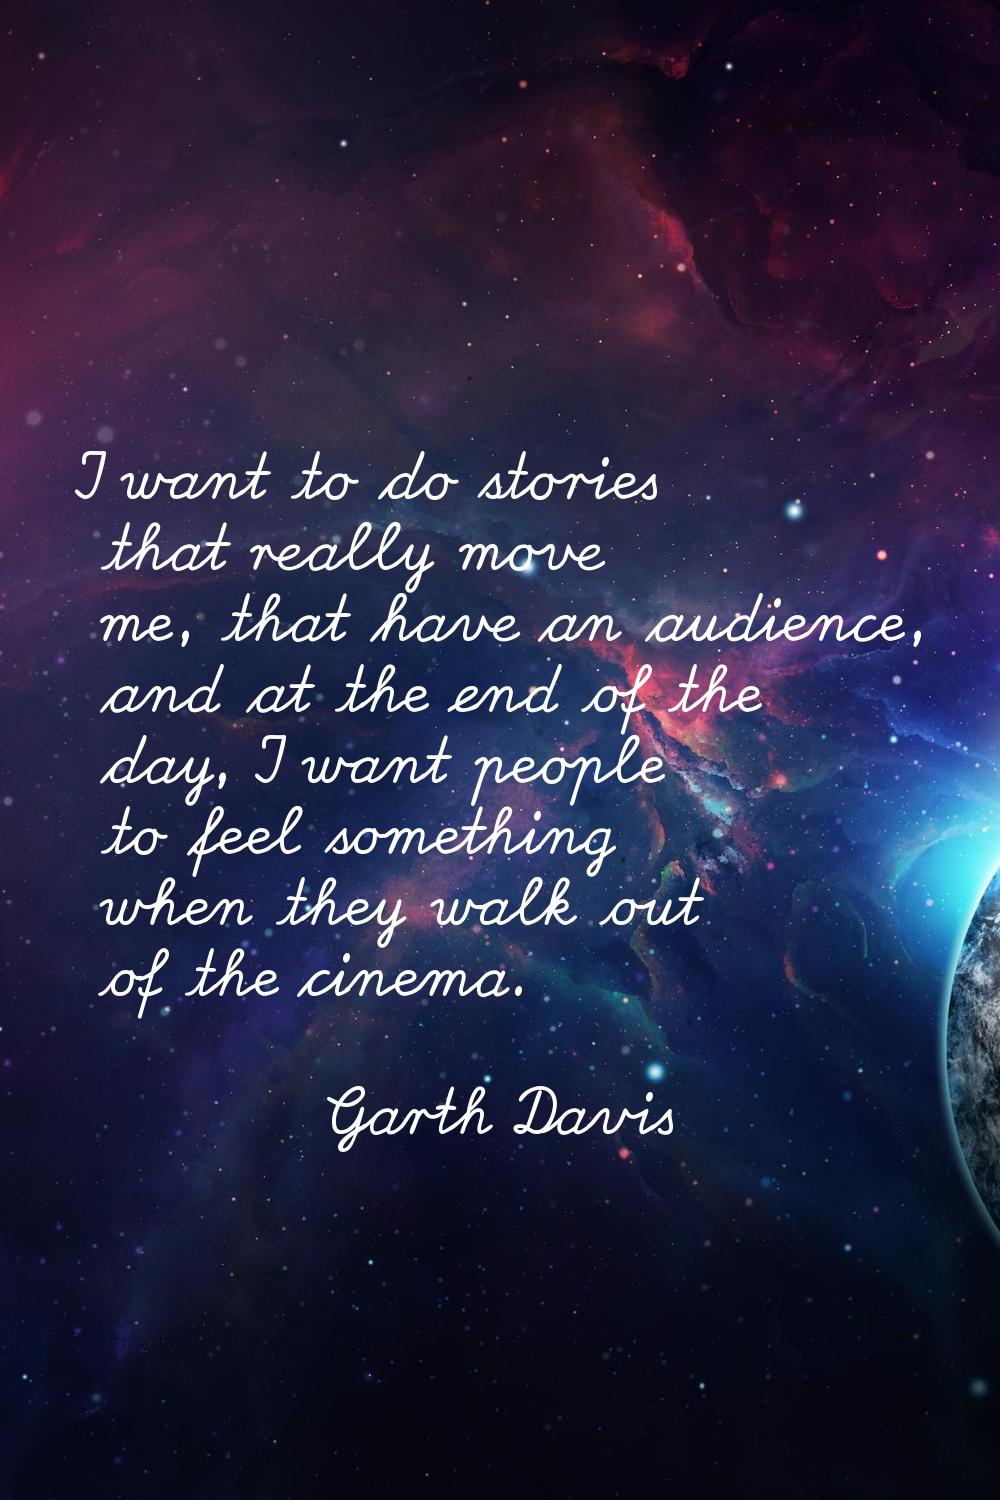 I want to do stories that really move me, that have an audience, and at the end of the day, I want 